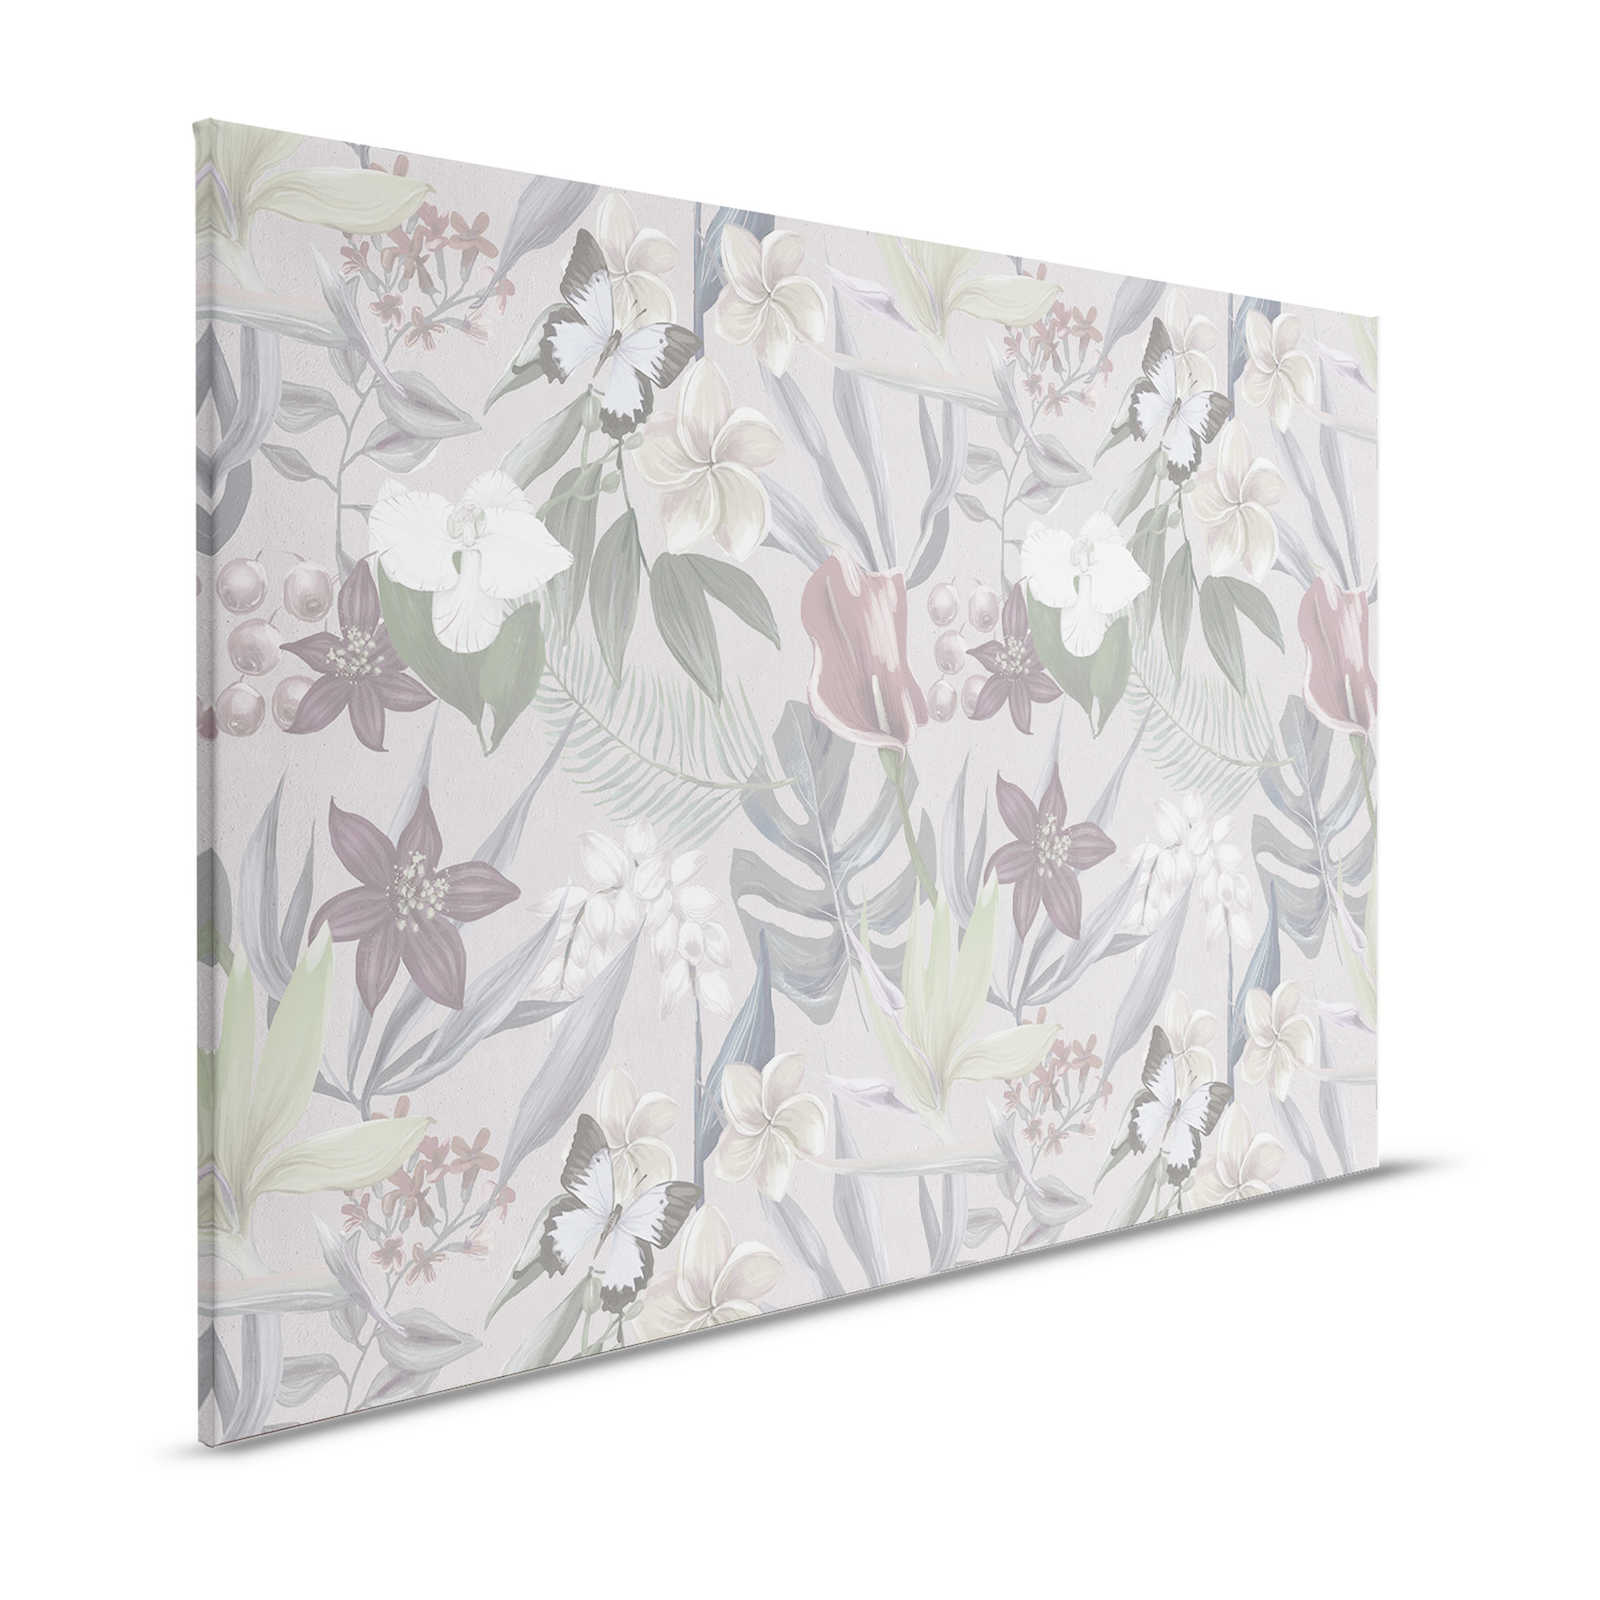 Floral Jungle Canvas Painting drawn | grey, white - 1.20 m x 0.80 m
